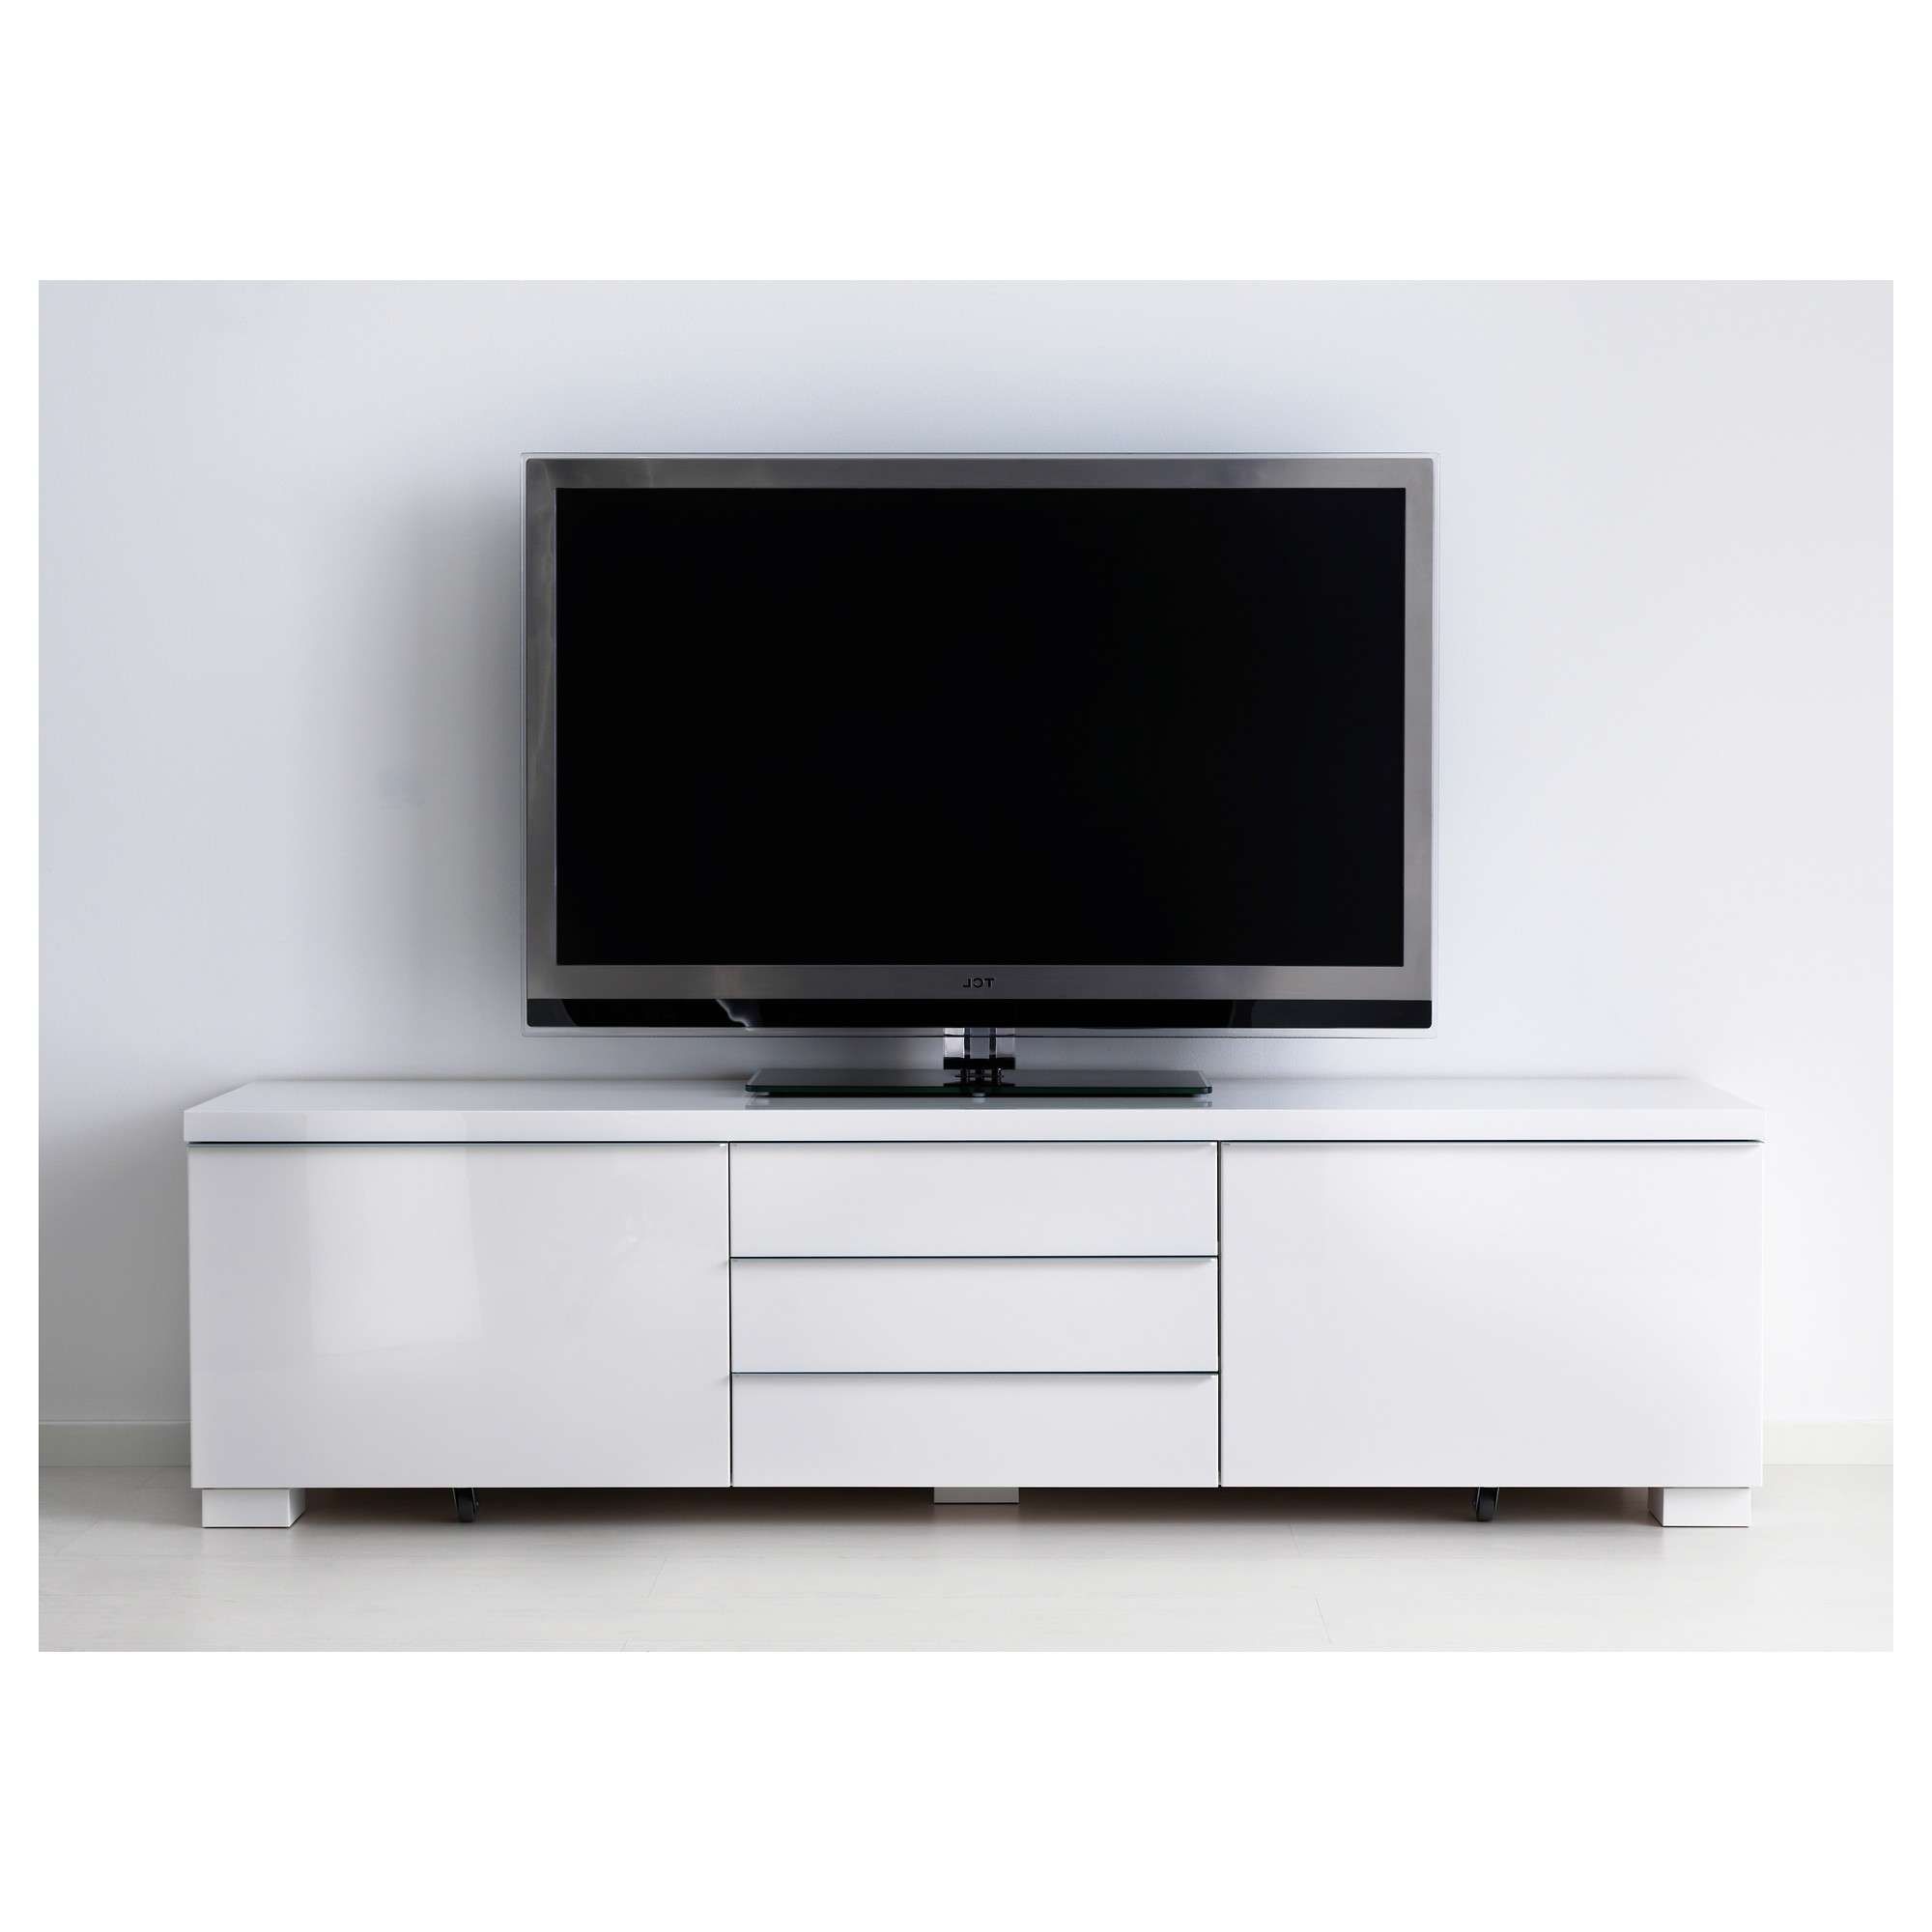 Bestå Burs Tv Bench High Gloss White 180x41 Cm – Ikea With High Gloss Tv Cabinets (View 3 of 20)